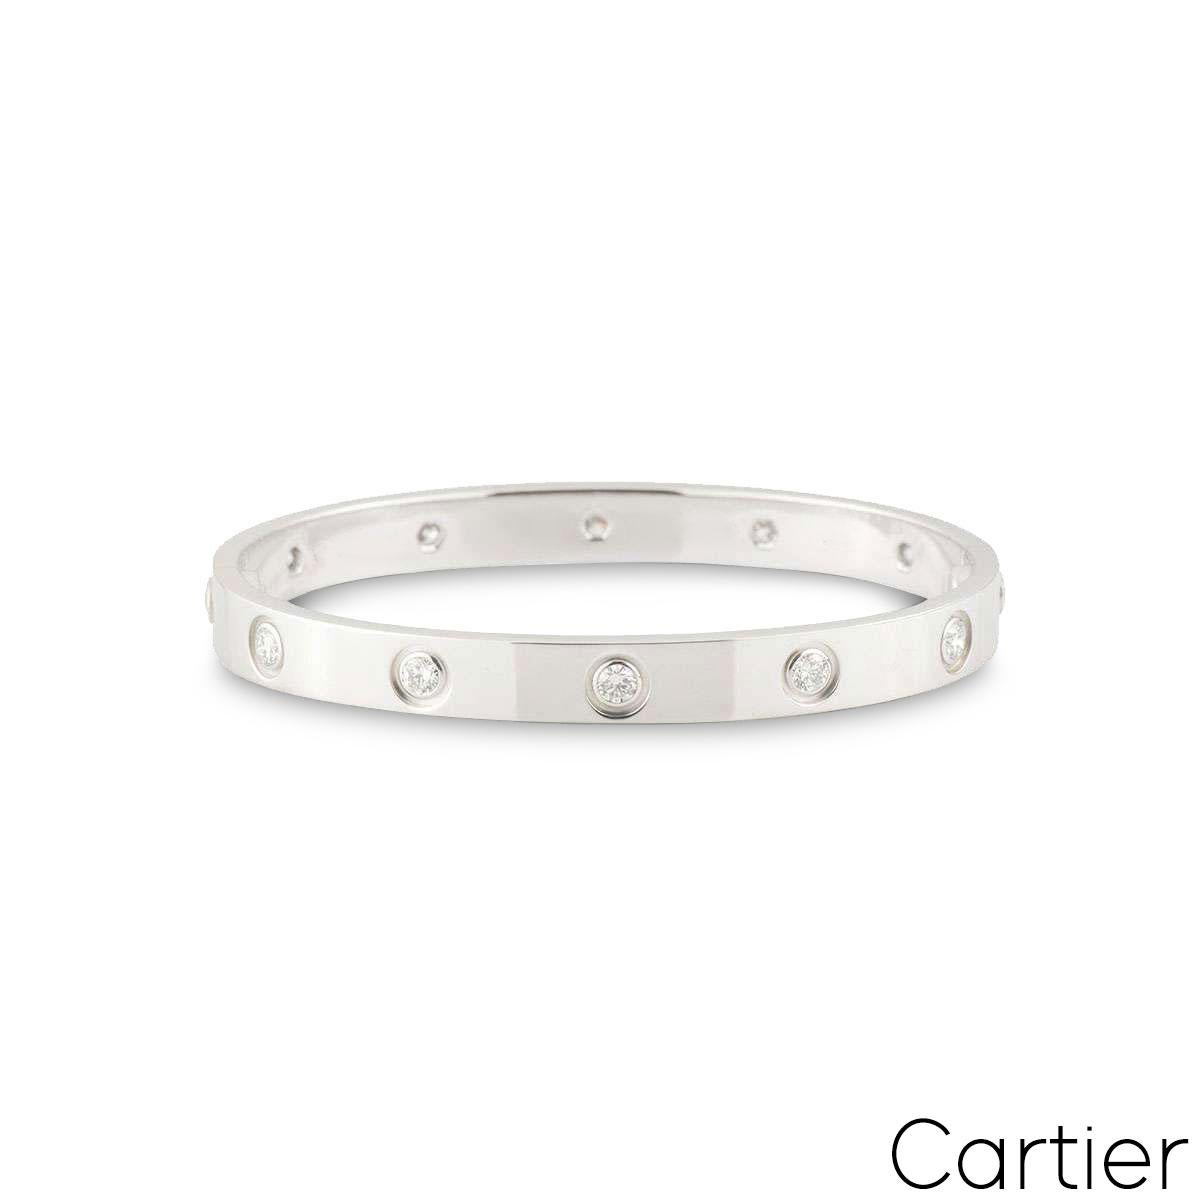 An iconic 18k white gold full diamond Cartier bracelet from the Love collection. The bracelet is set with 10 round brilliant cut diamonds circulating the outer edge throughout in a rubover setting. The bracelet is size 20 and features the new style